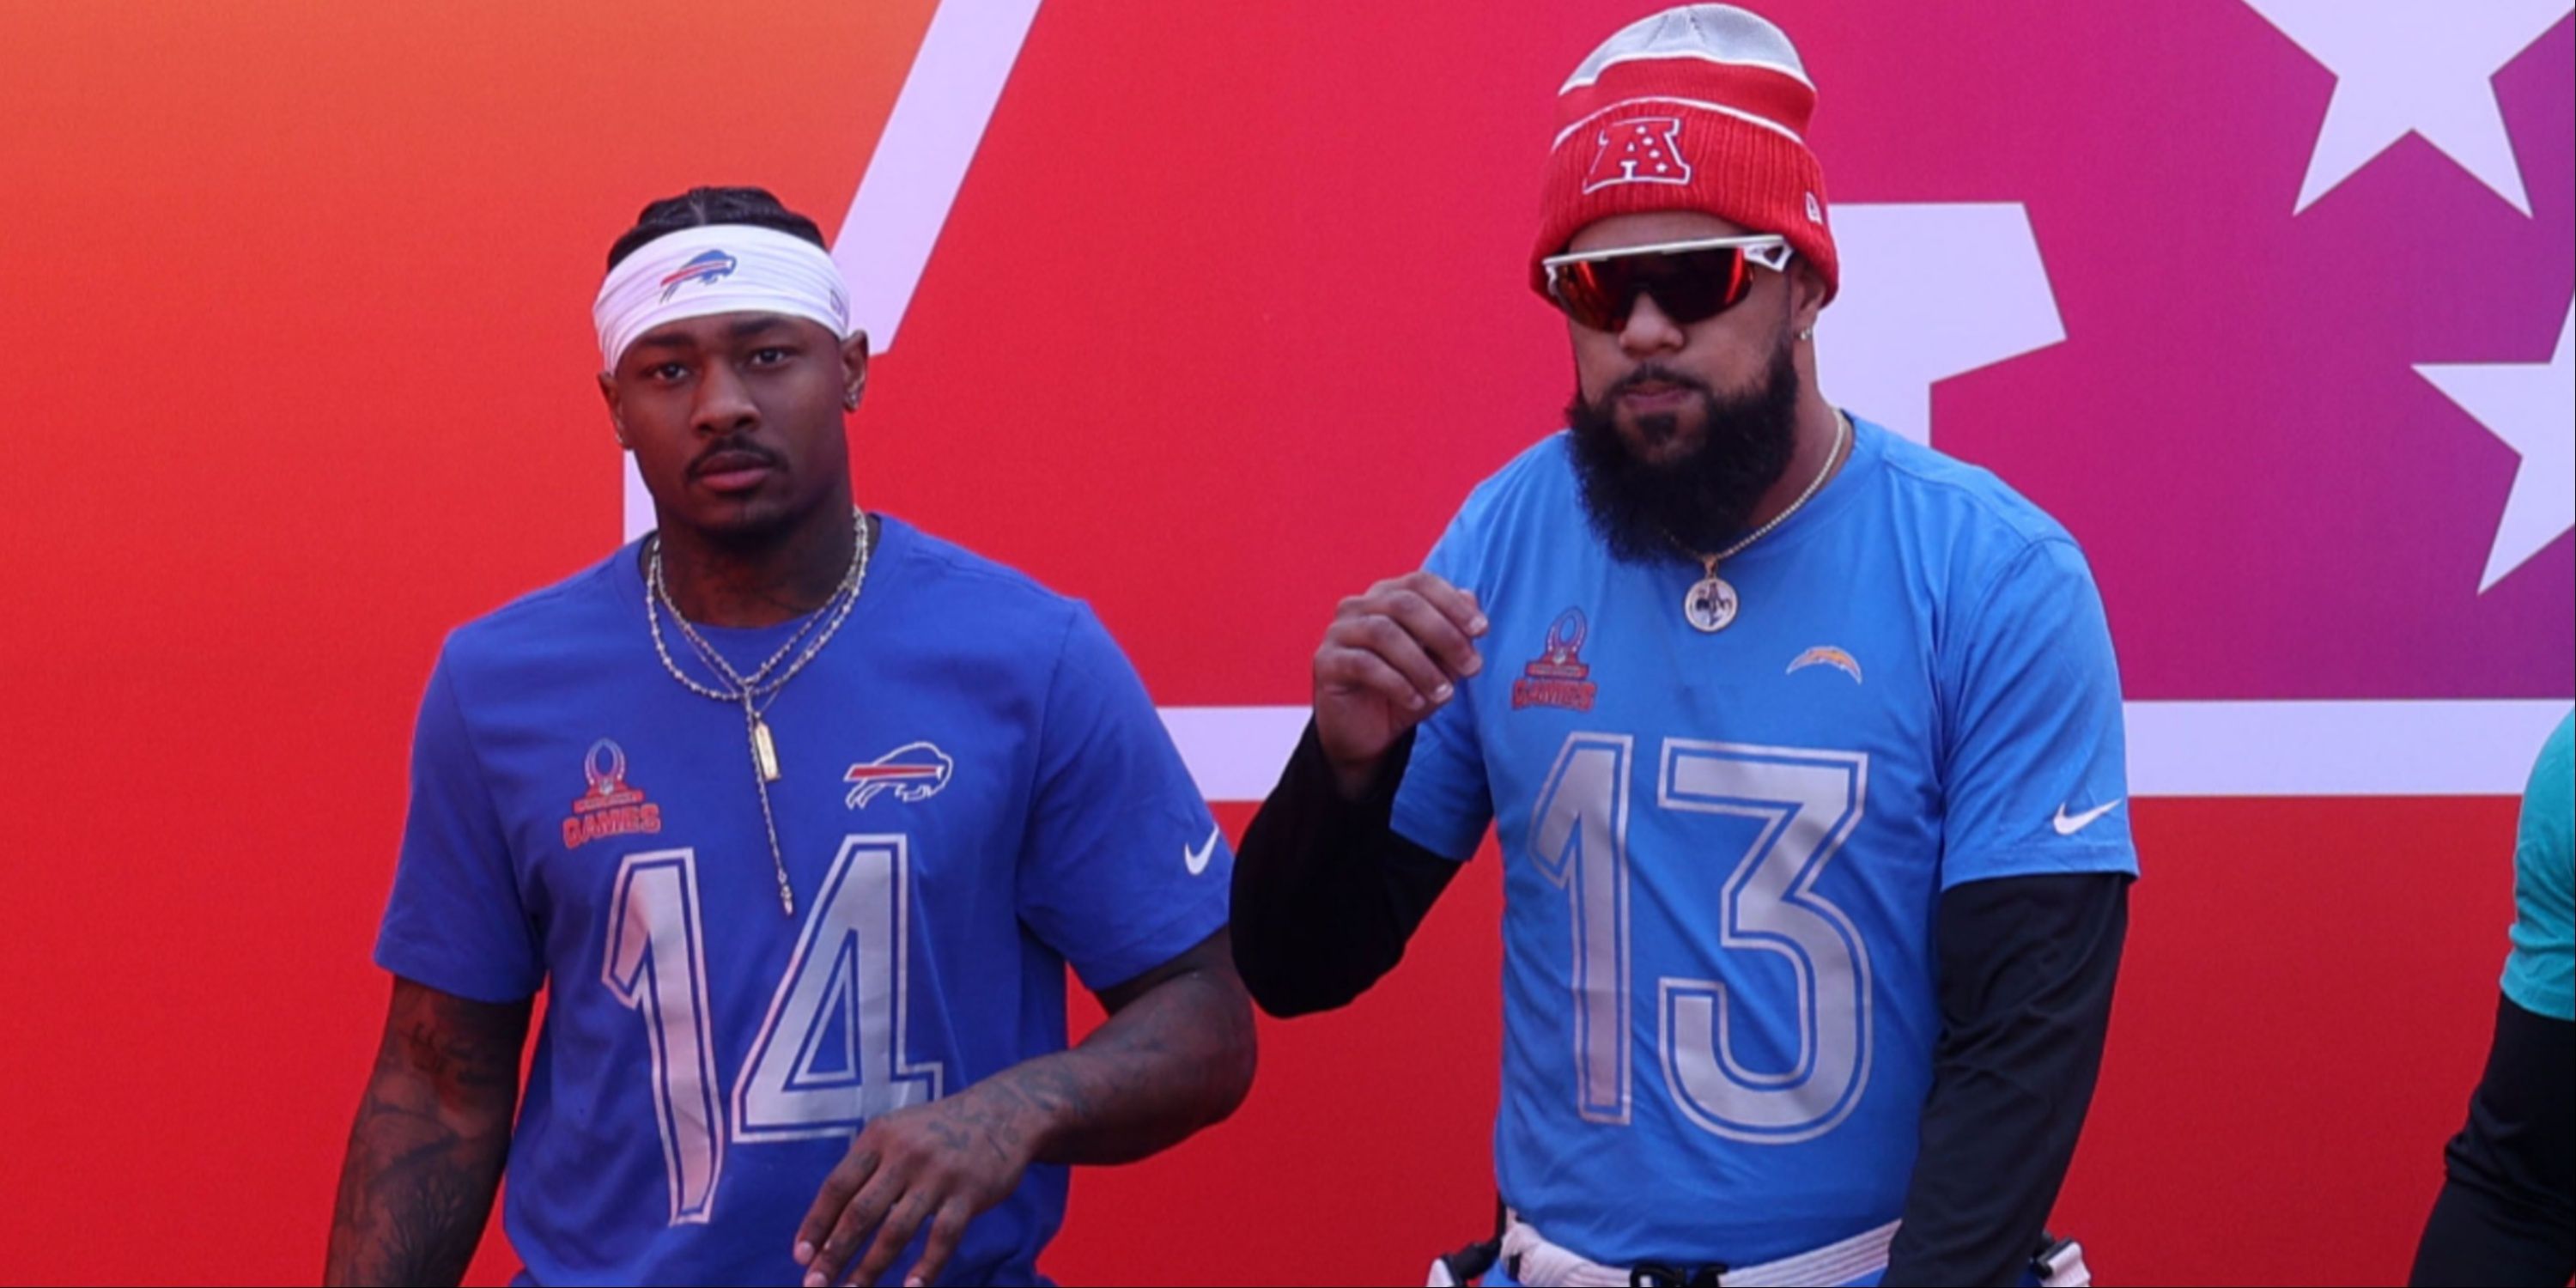 Stefon Diggs and Keenan Allen at the NFL Pro Bowl